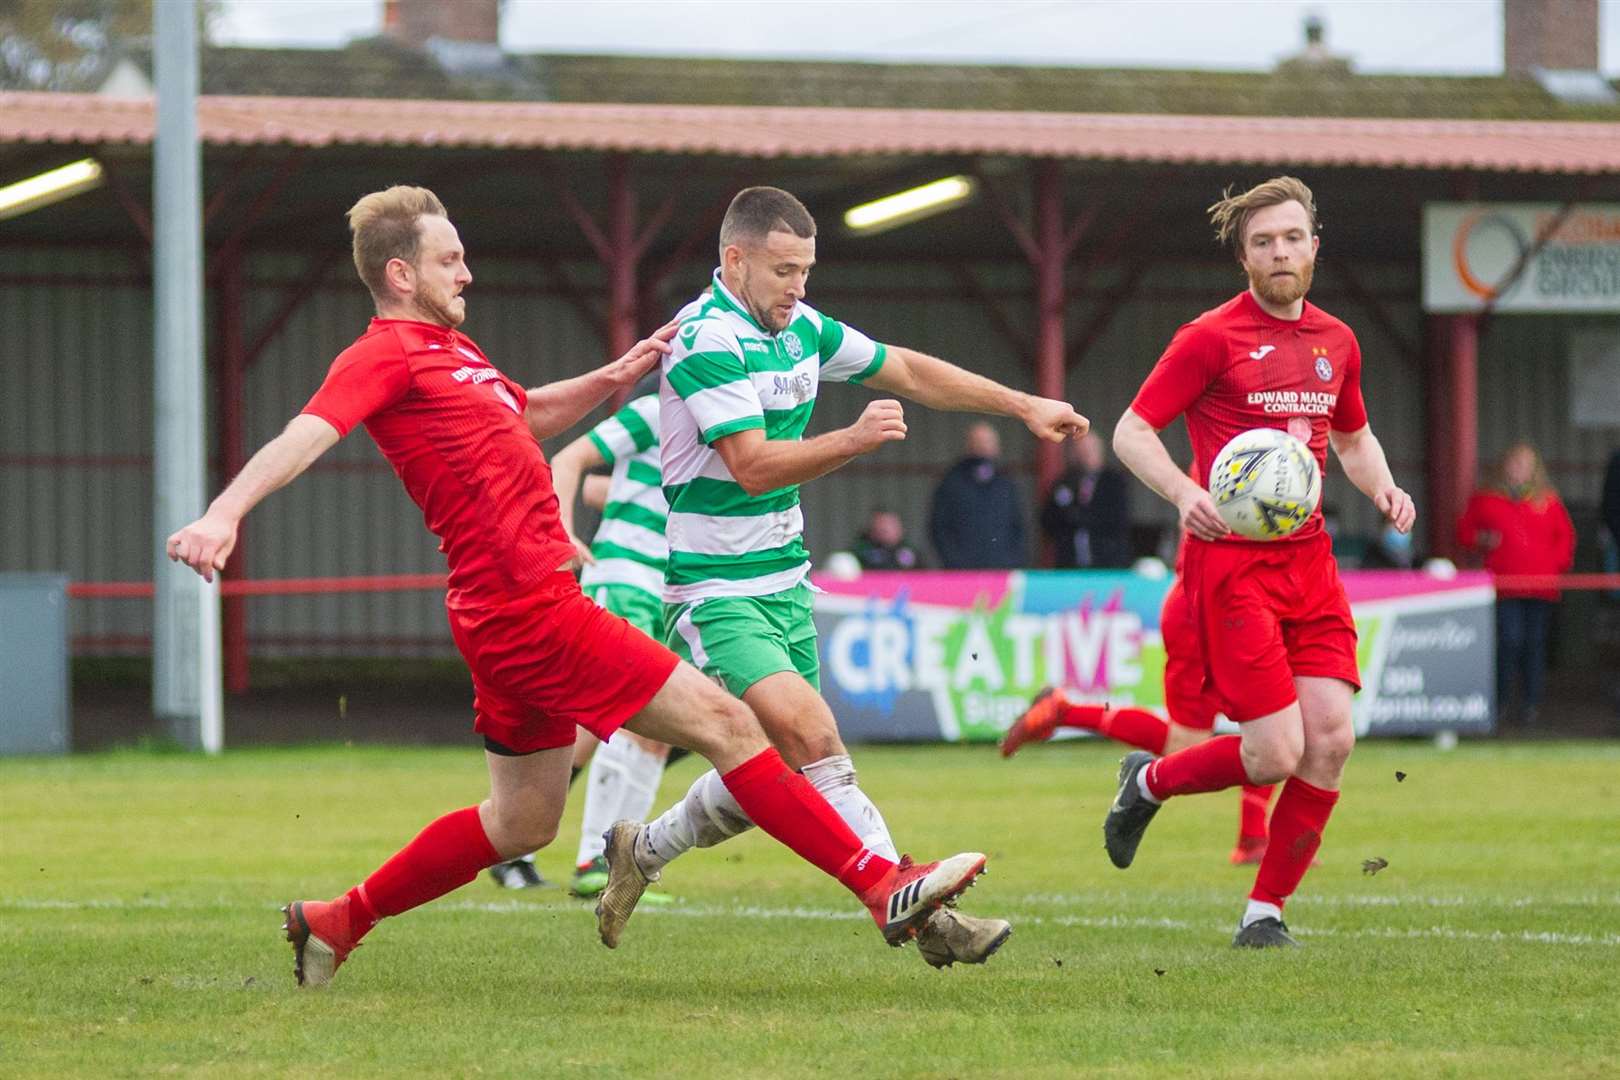 Brora Rangers' centre back Mark Nicolson clears the ball away from Buckie Thistle's Sam Urquhart...Brora Rangers FC (2) vs Buckie Thistle FC (2) - Buckie win 4-3 on penalties - Highland League Cup Semi Final - Dudgeon Park, Brora 18/10/2020...Picture: Daniel Forsyth..